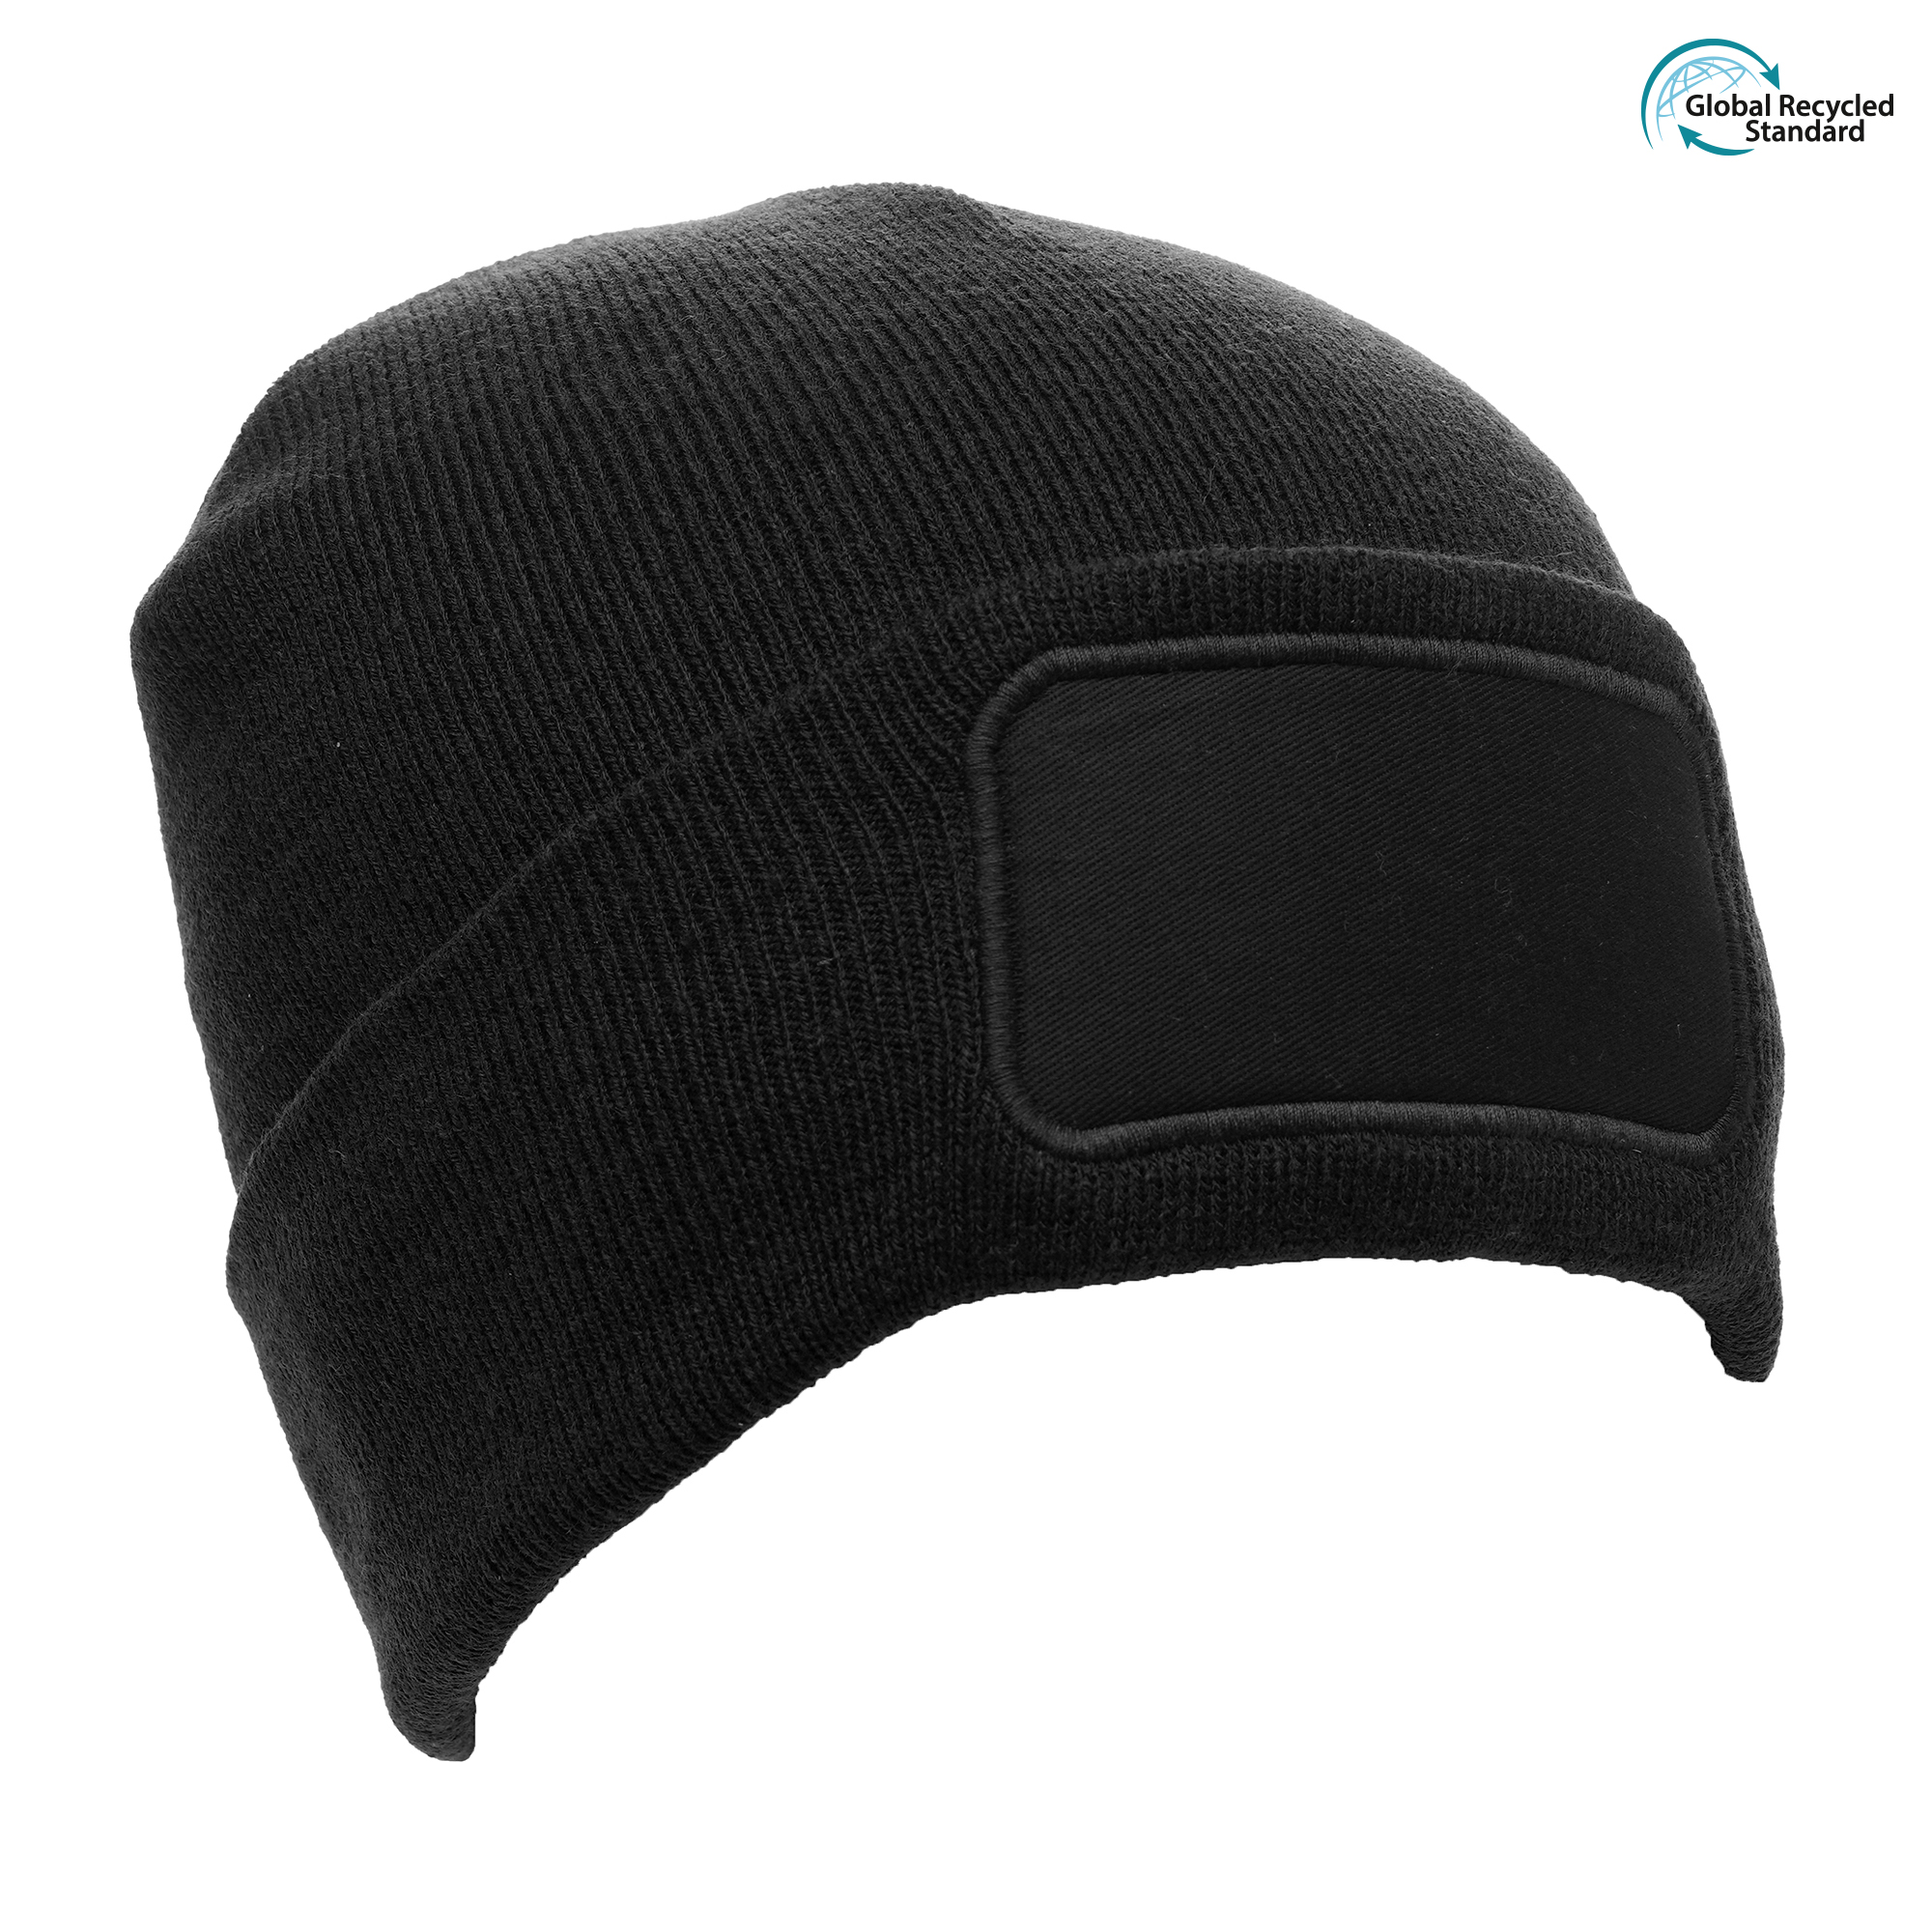 Recycled Rectangular Patch Beanie Hat